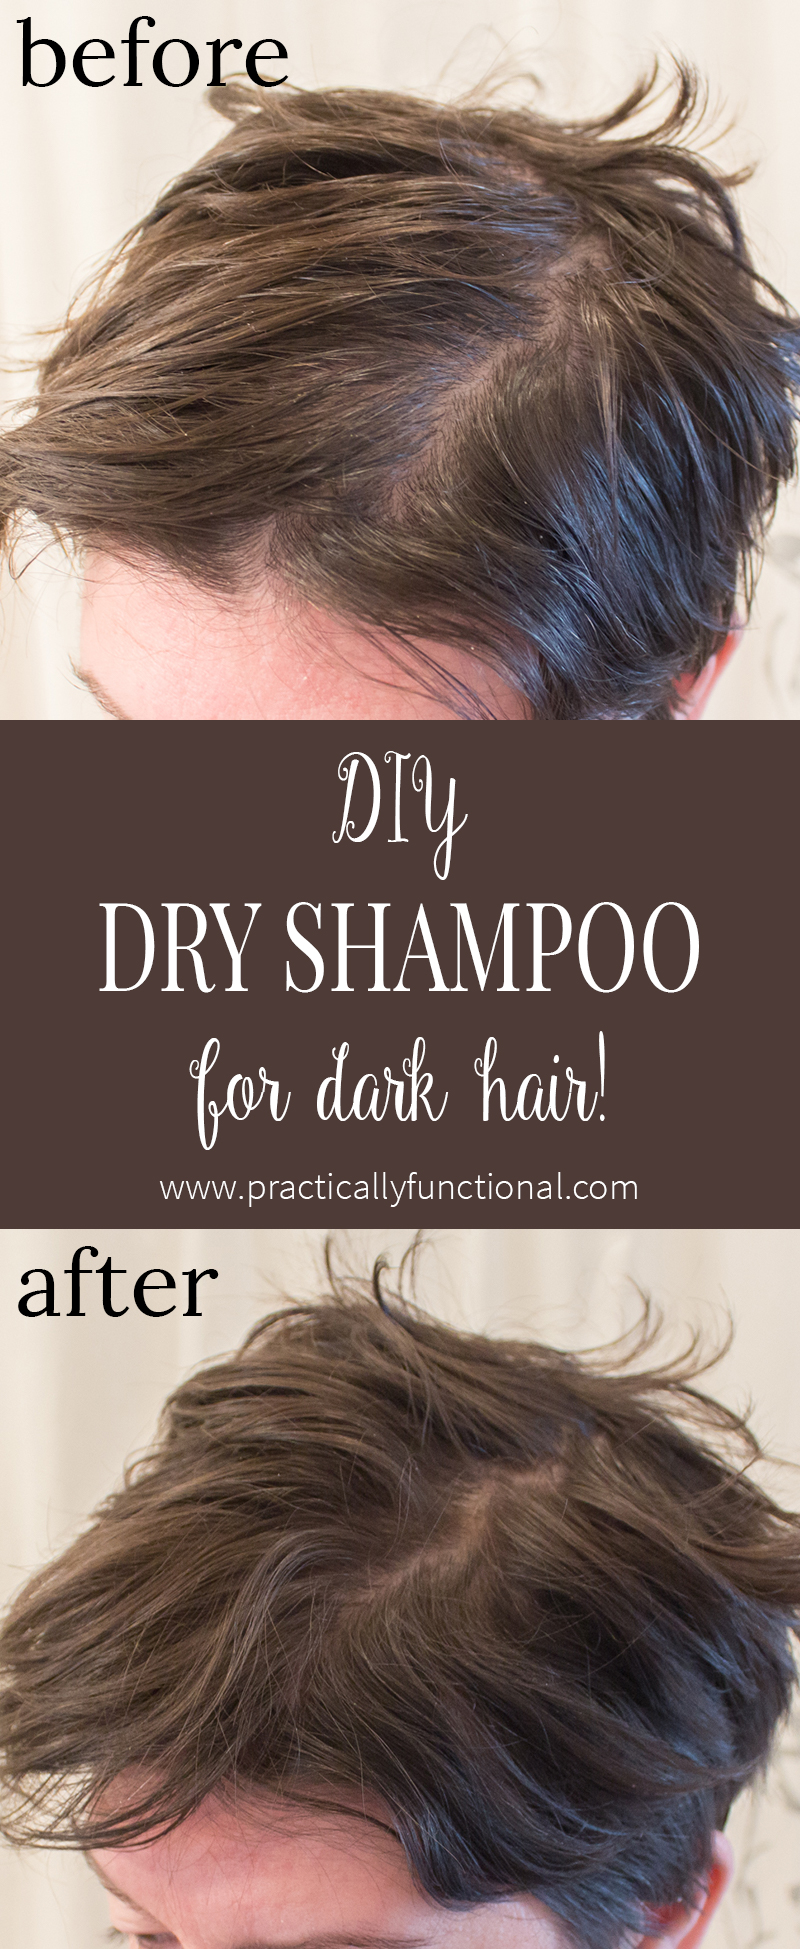 This is my favorite DIY dry shampoo recipe for dark hair; gets rid of the greasy shine and adds a ton of volume so you can style your hair just like normal! (Works for light hair too, just leave out the cocoa powder)